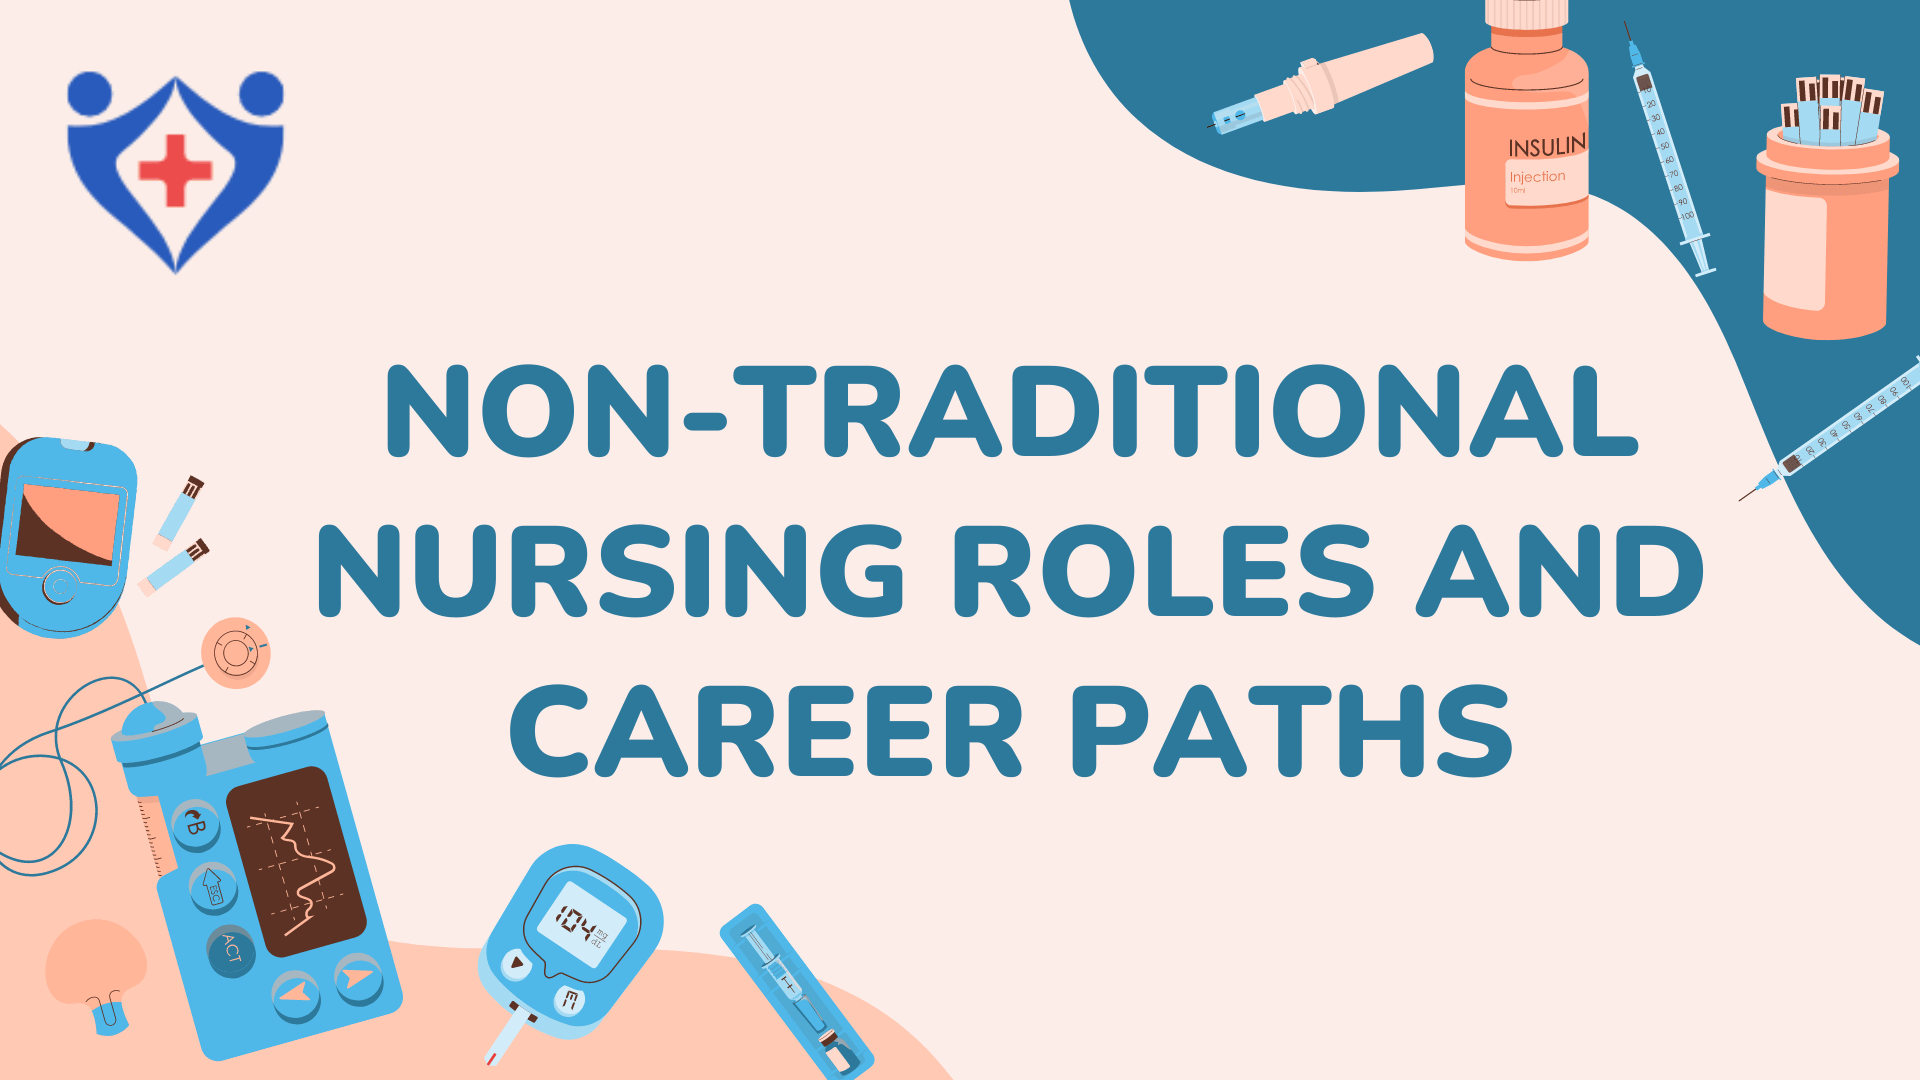 Non-Traditional Nursing Roles and Career Paths